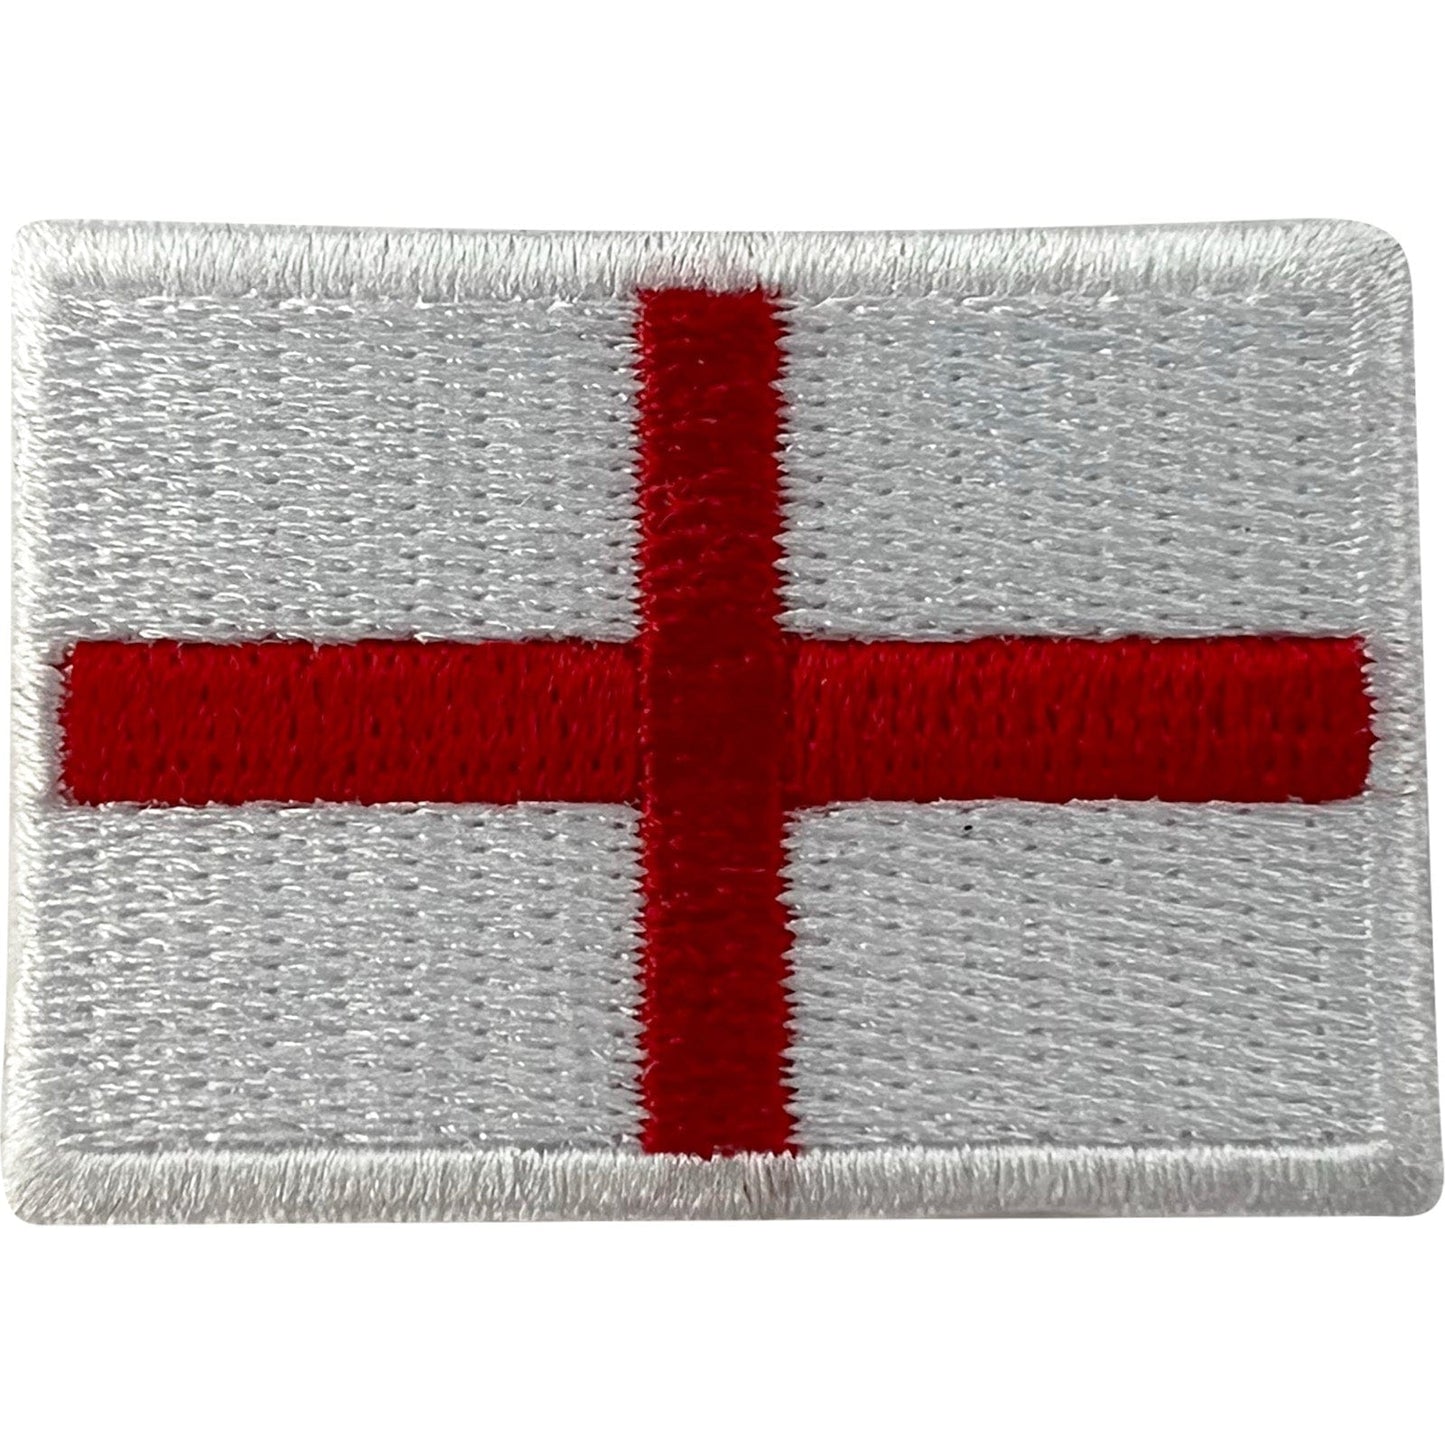 Mini England Flag Patch Iron Sew On T Shirt Cap Football Small Embroidered Badge